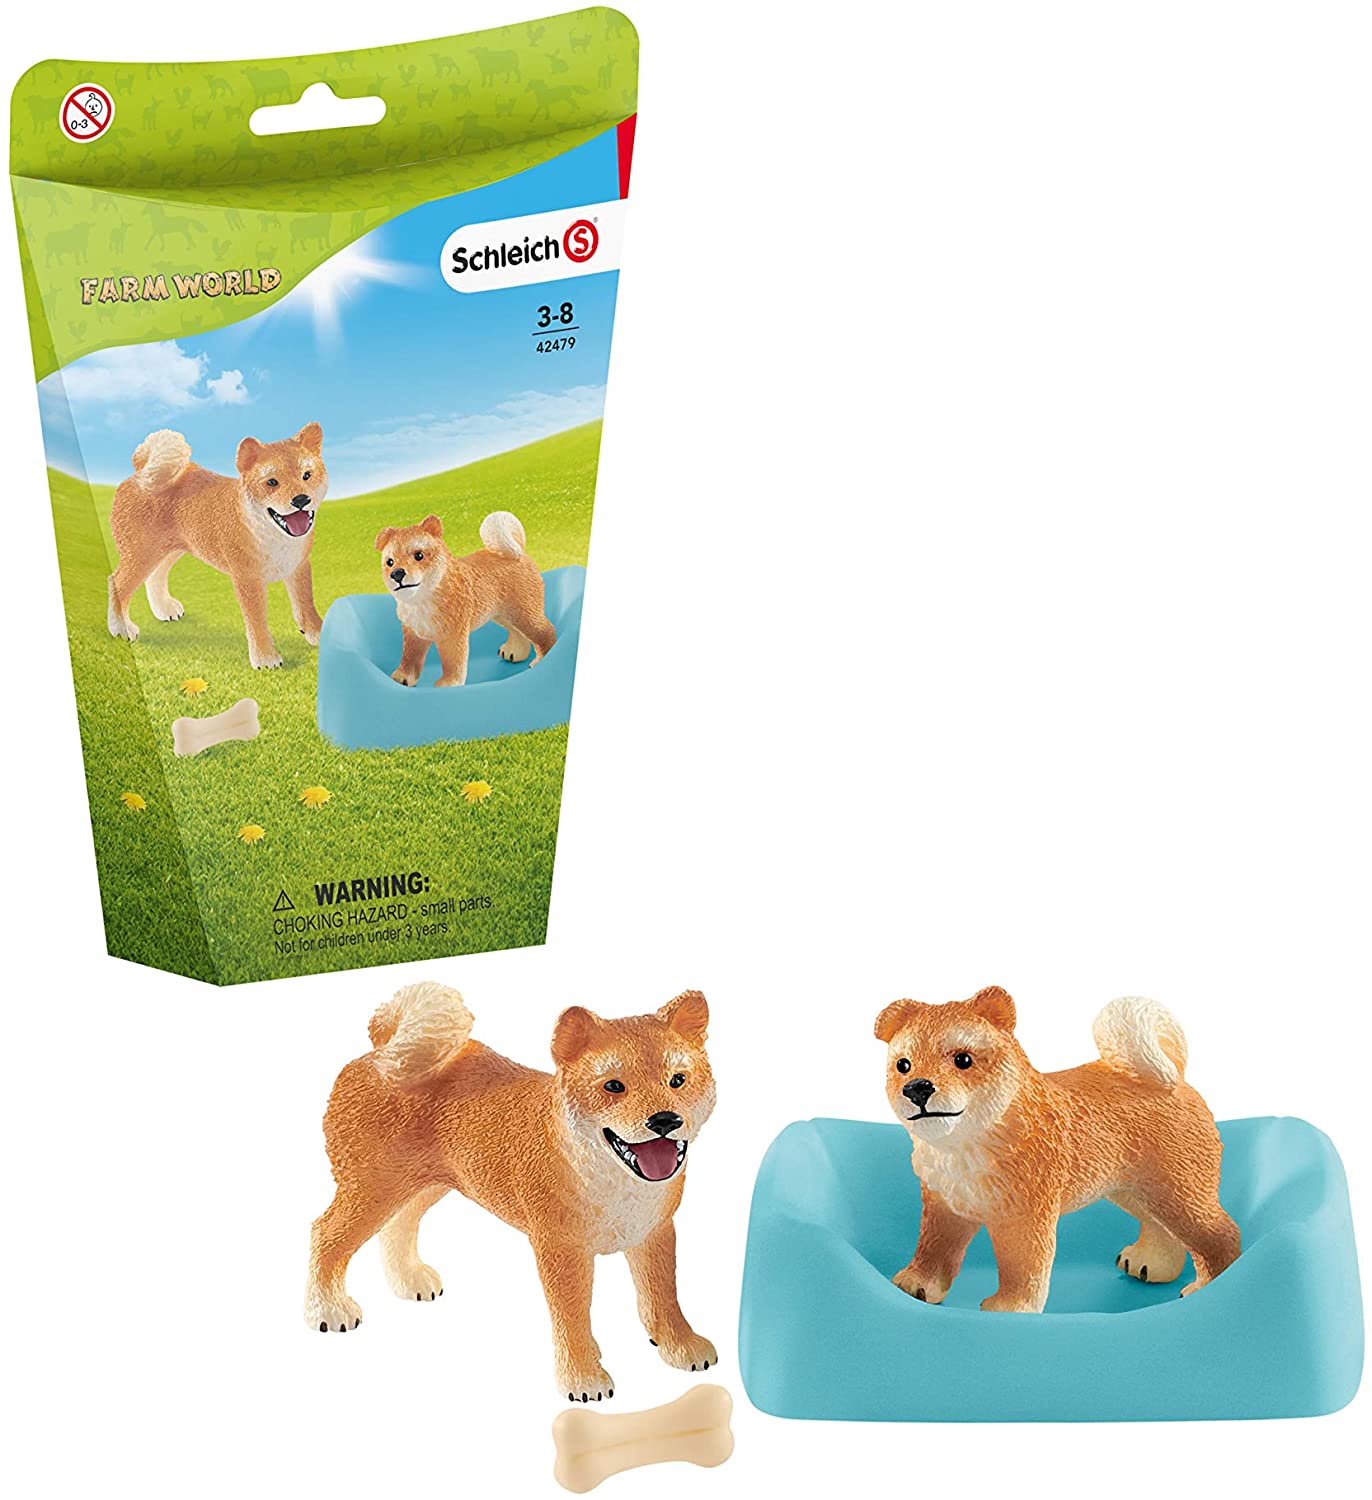 Shiba Inu mother and puppy 42479